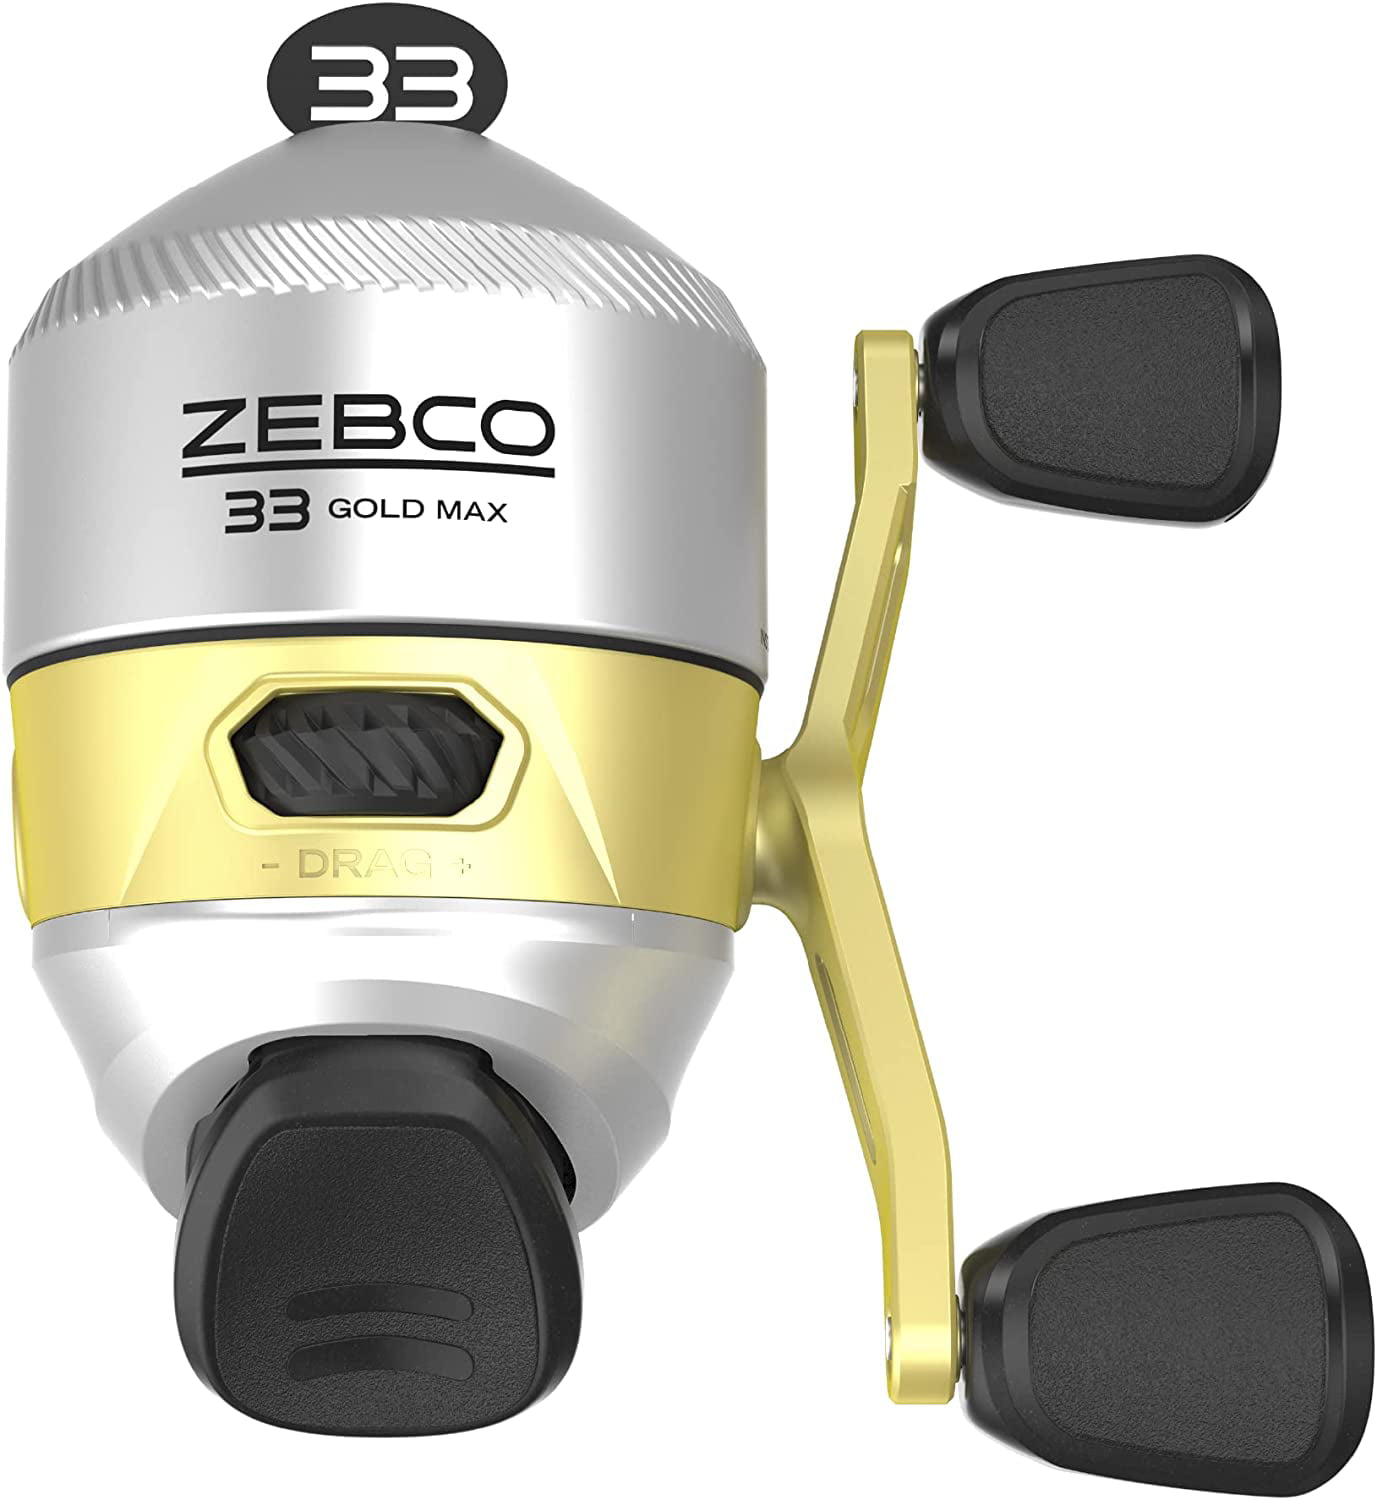 33 Fishing and Frame Anti-Reverse, with Graphite a Powerful Zebco and 2.6:1 a Ratio Smooth MicroFine 2+1 Instant Dial-Adjustable Bearings MAX Gear Drag, and Gold Reel, Lightweight Silver/Gold Spincast